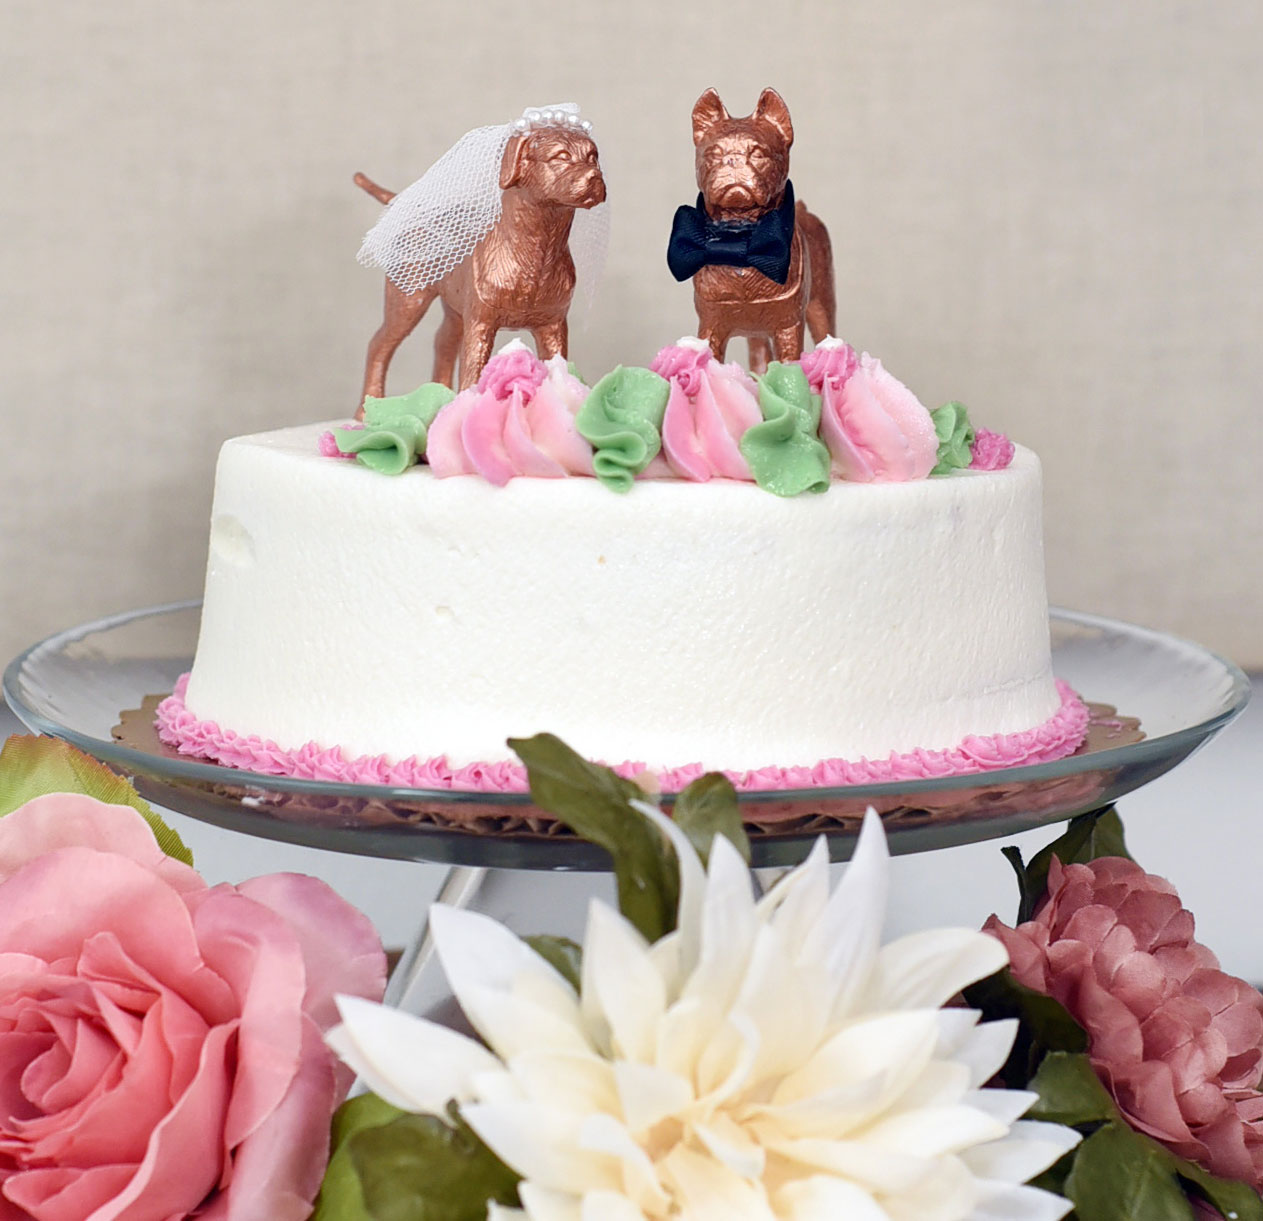 Looking for a way to include your pup in your wedding or simply express your canine love to your guests? These DIY dog wedding cake toppers are affordable, fun, and relatively easy to make!